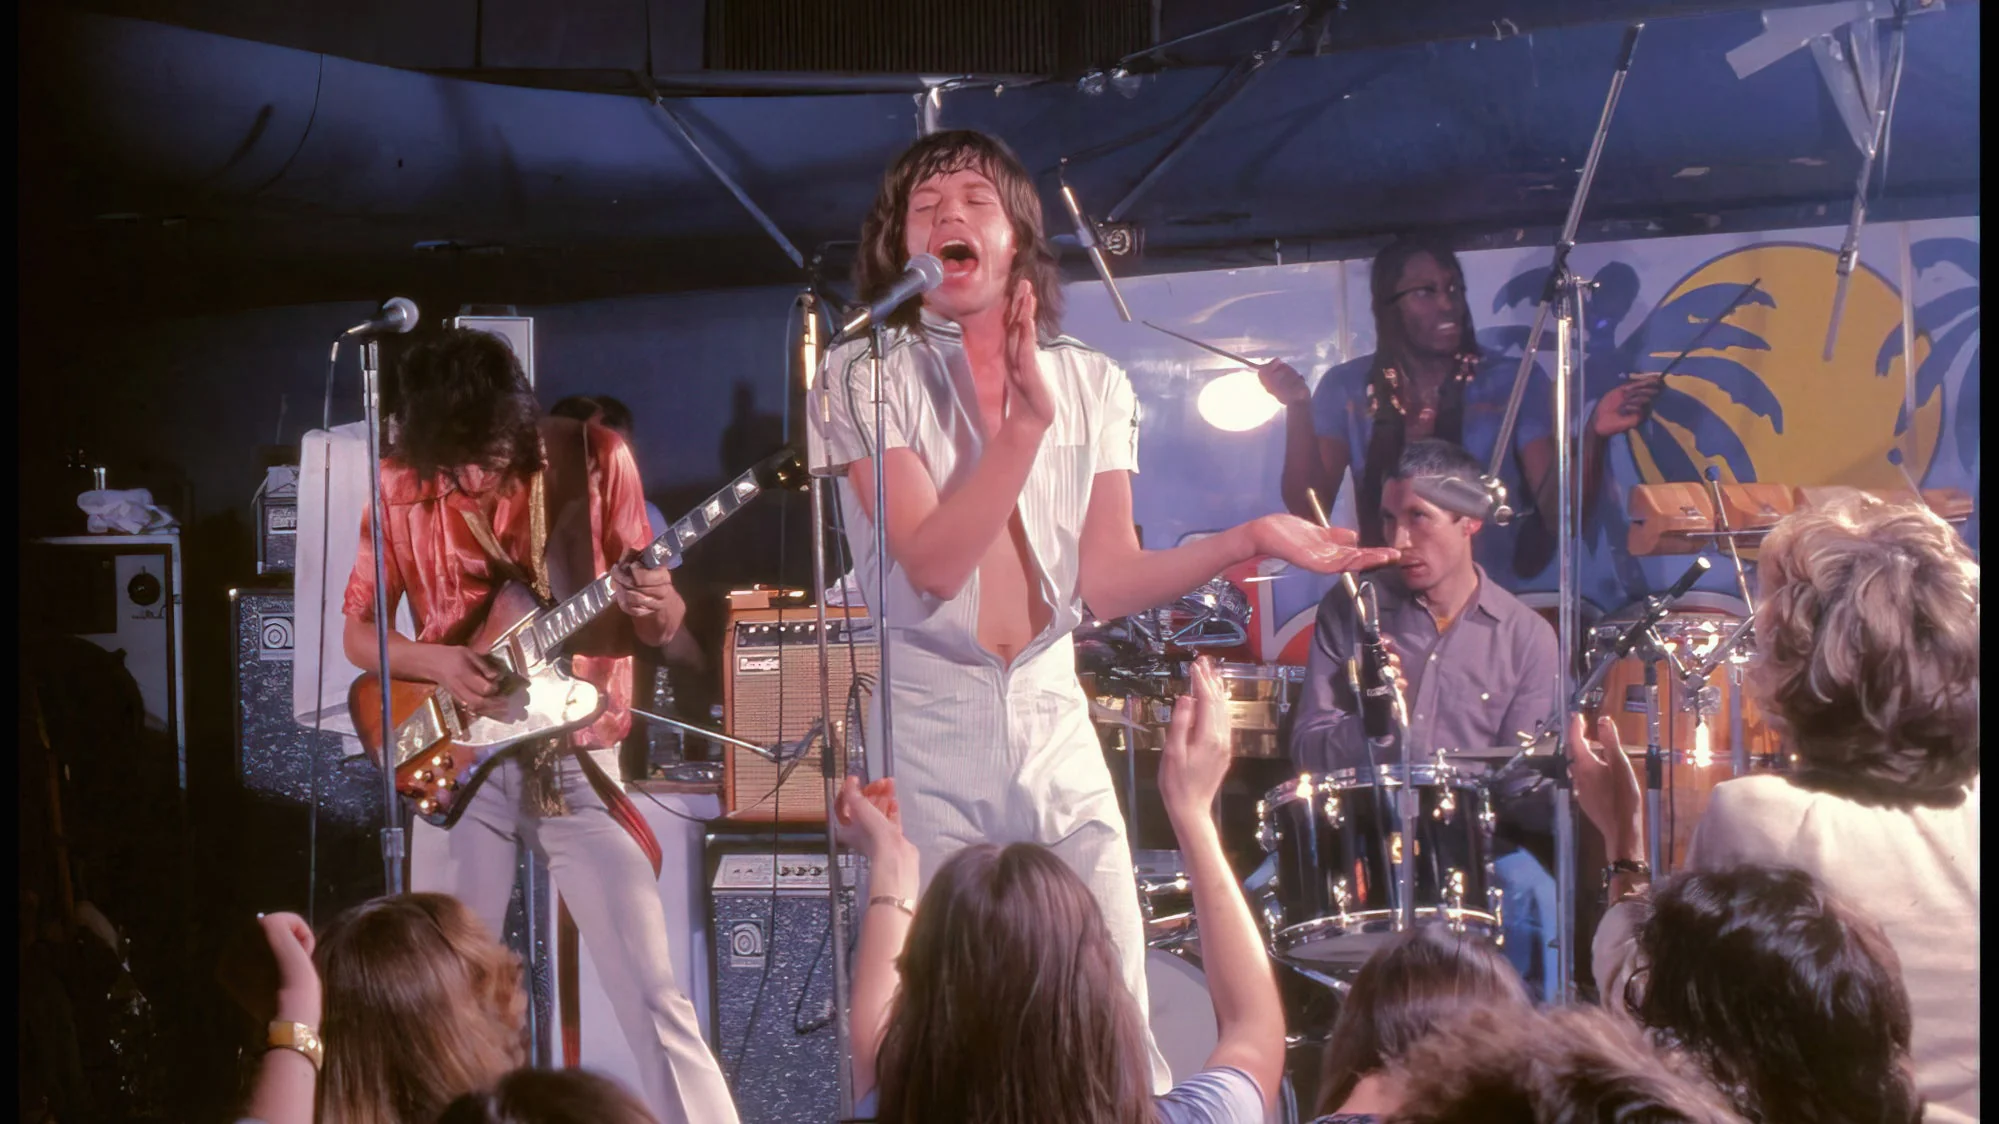 From Stadiums to Taverns: The Night The Stones Rolled into El Mocambo